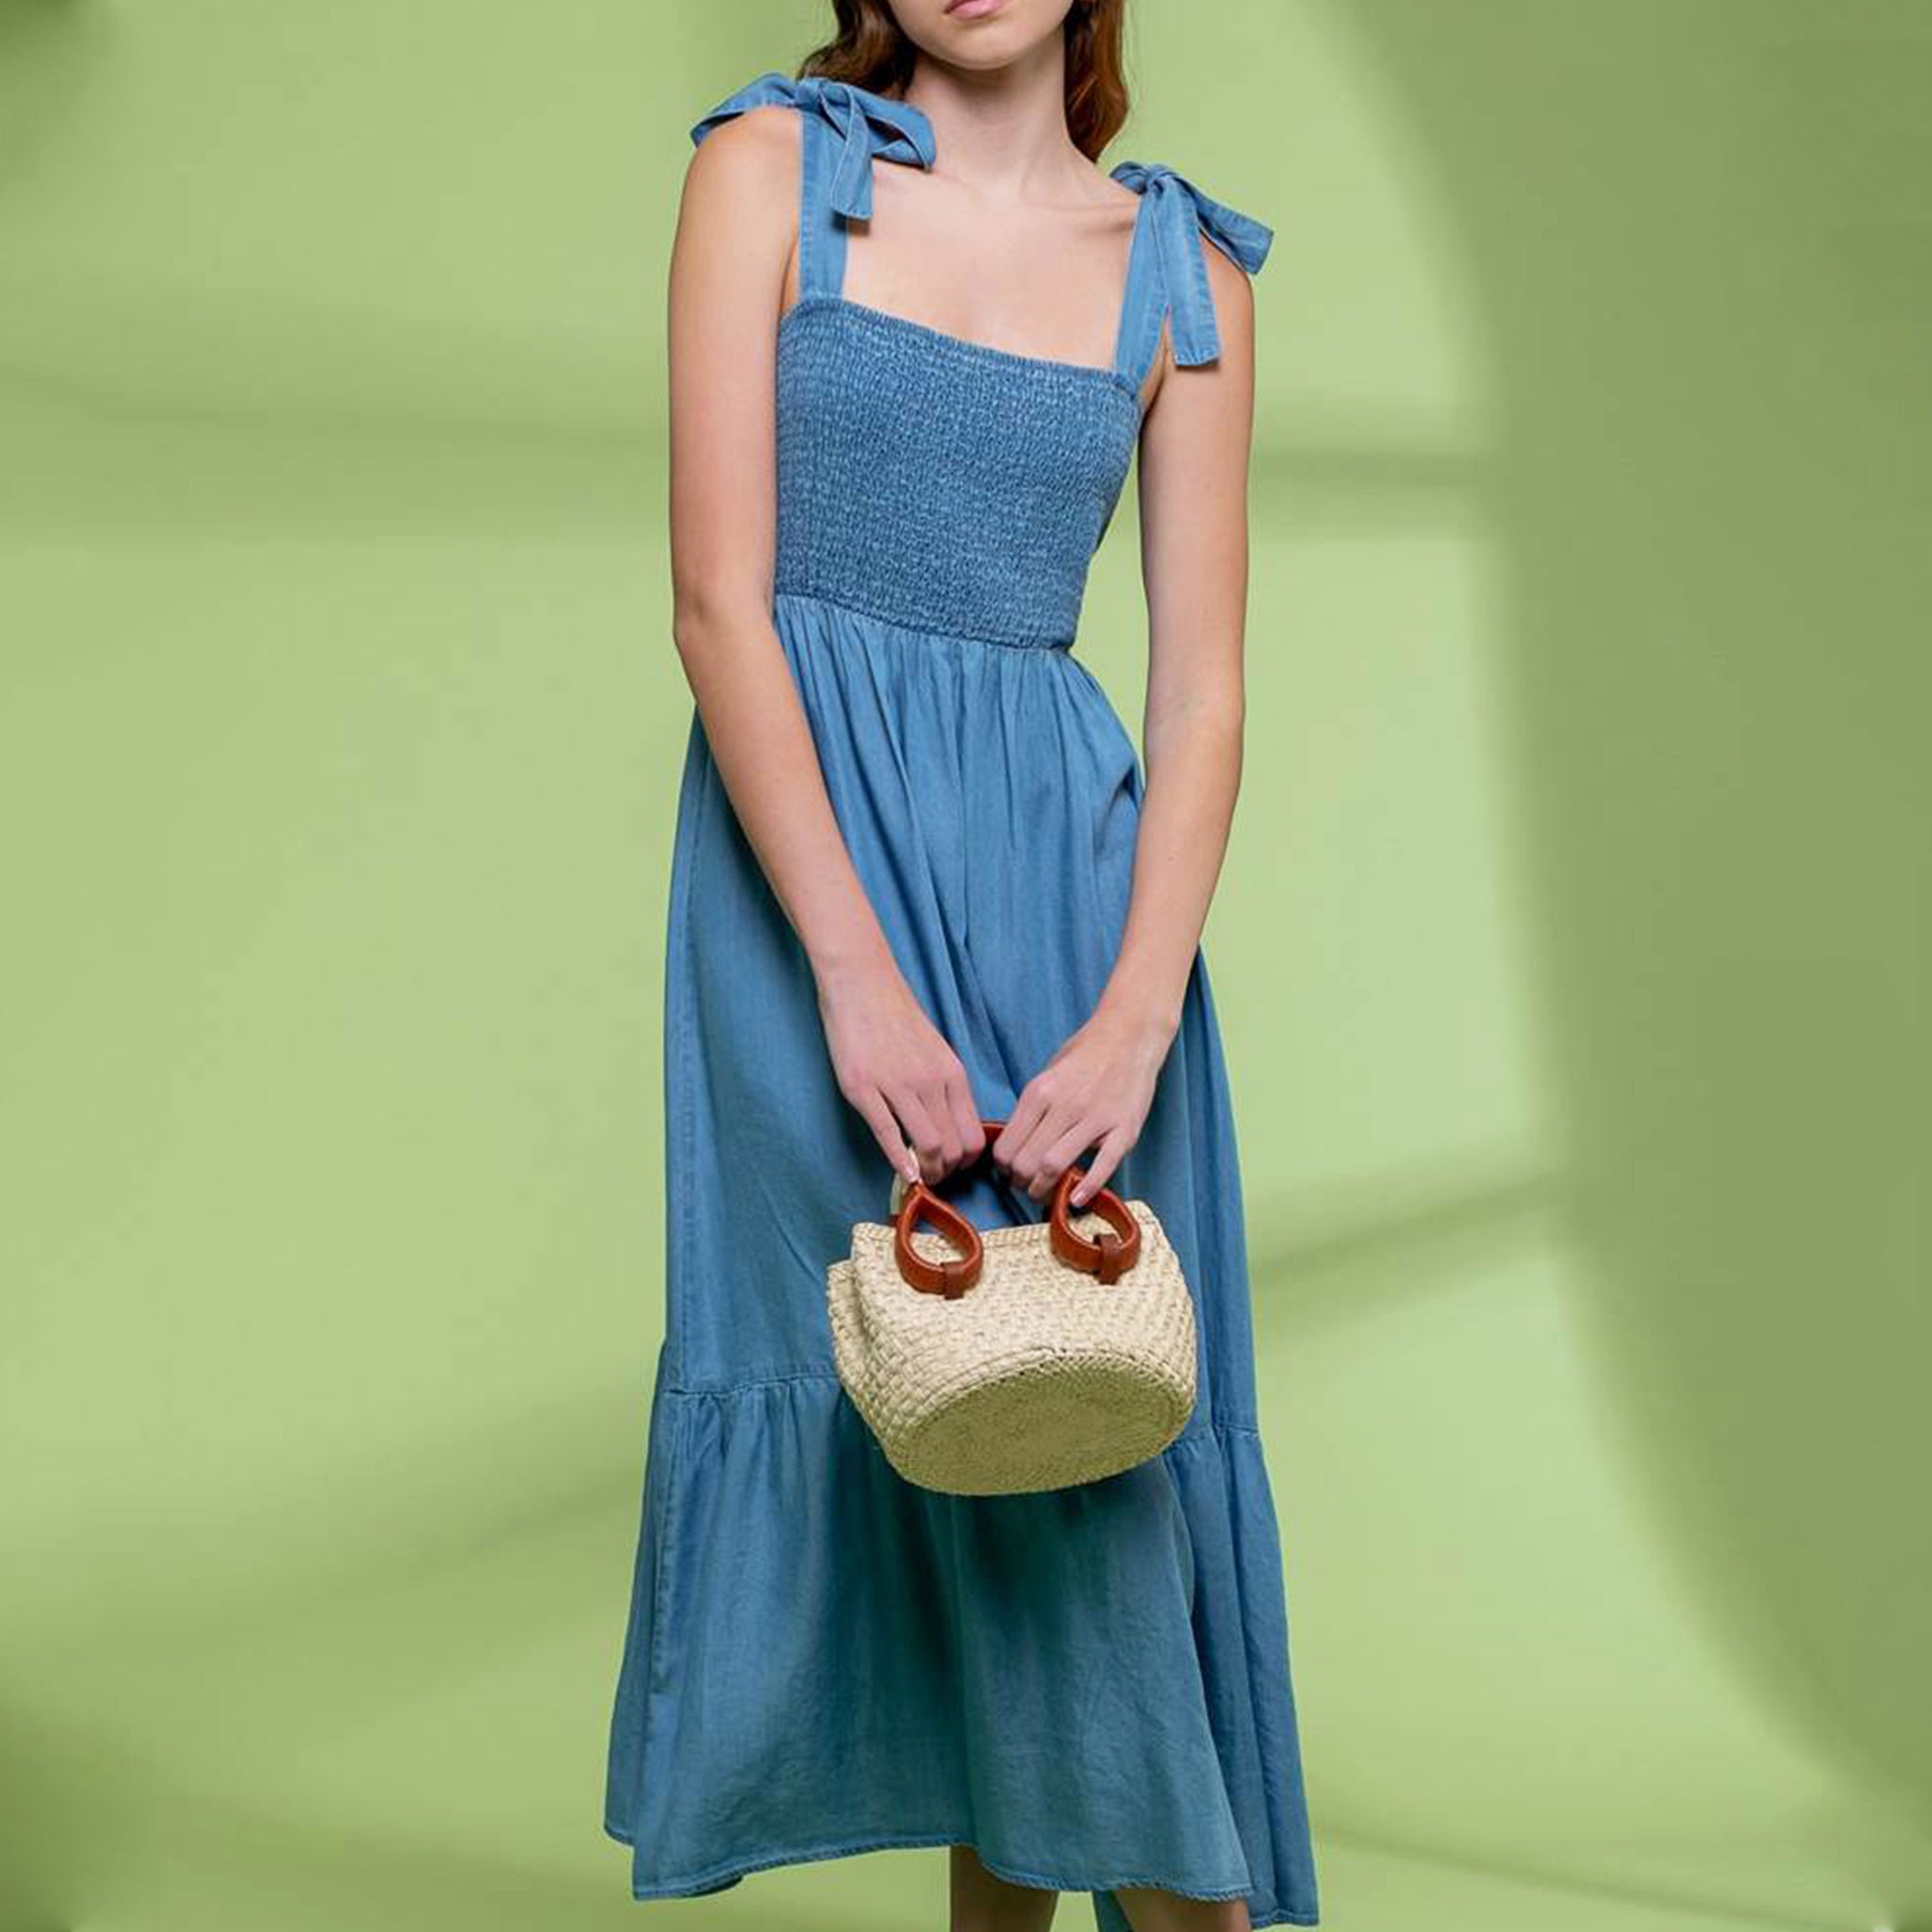 On a green shadow background is a model wearing a blue flowy midi dress with tie shoulder straps and a square neckline.